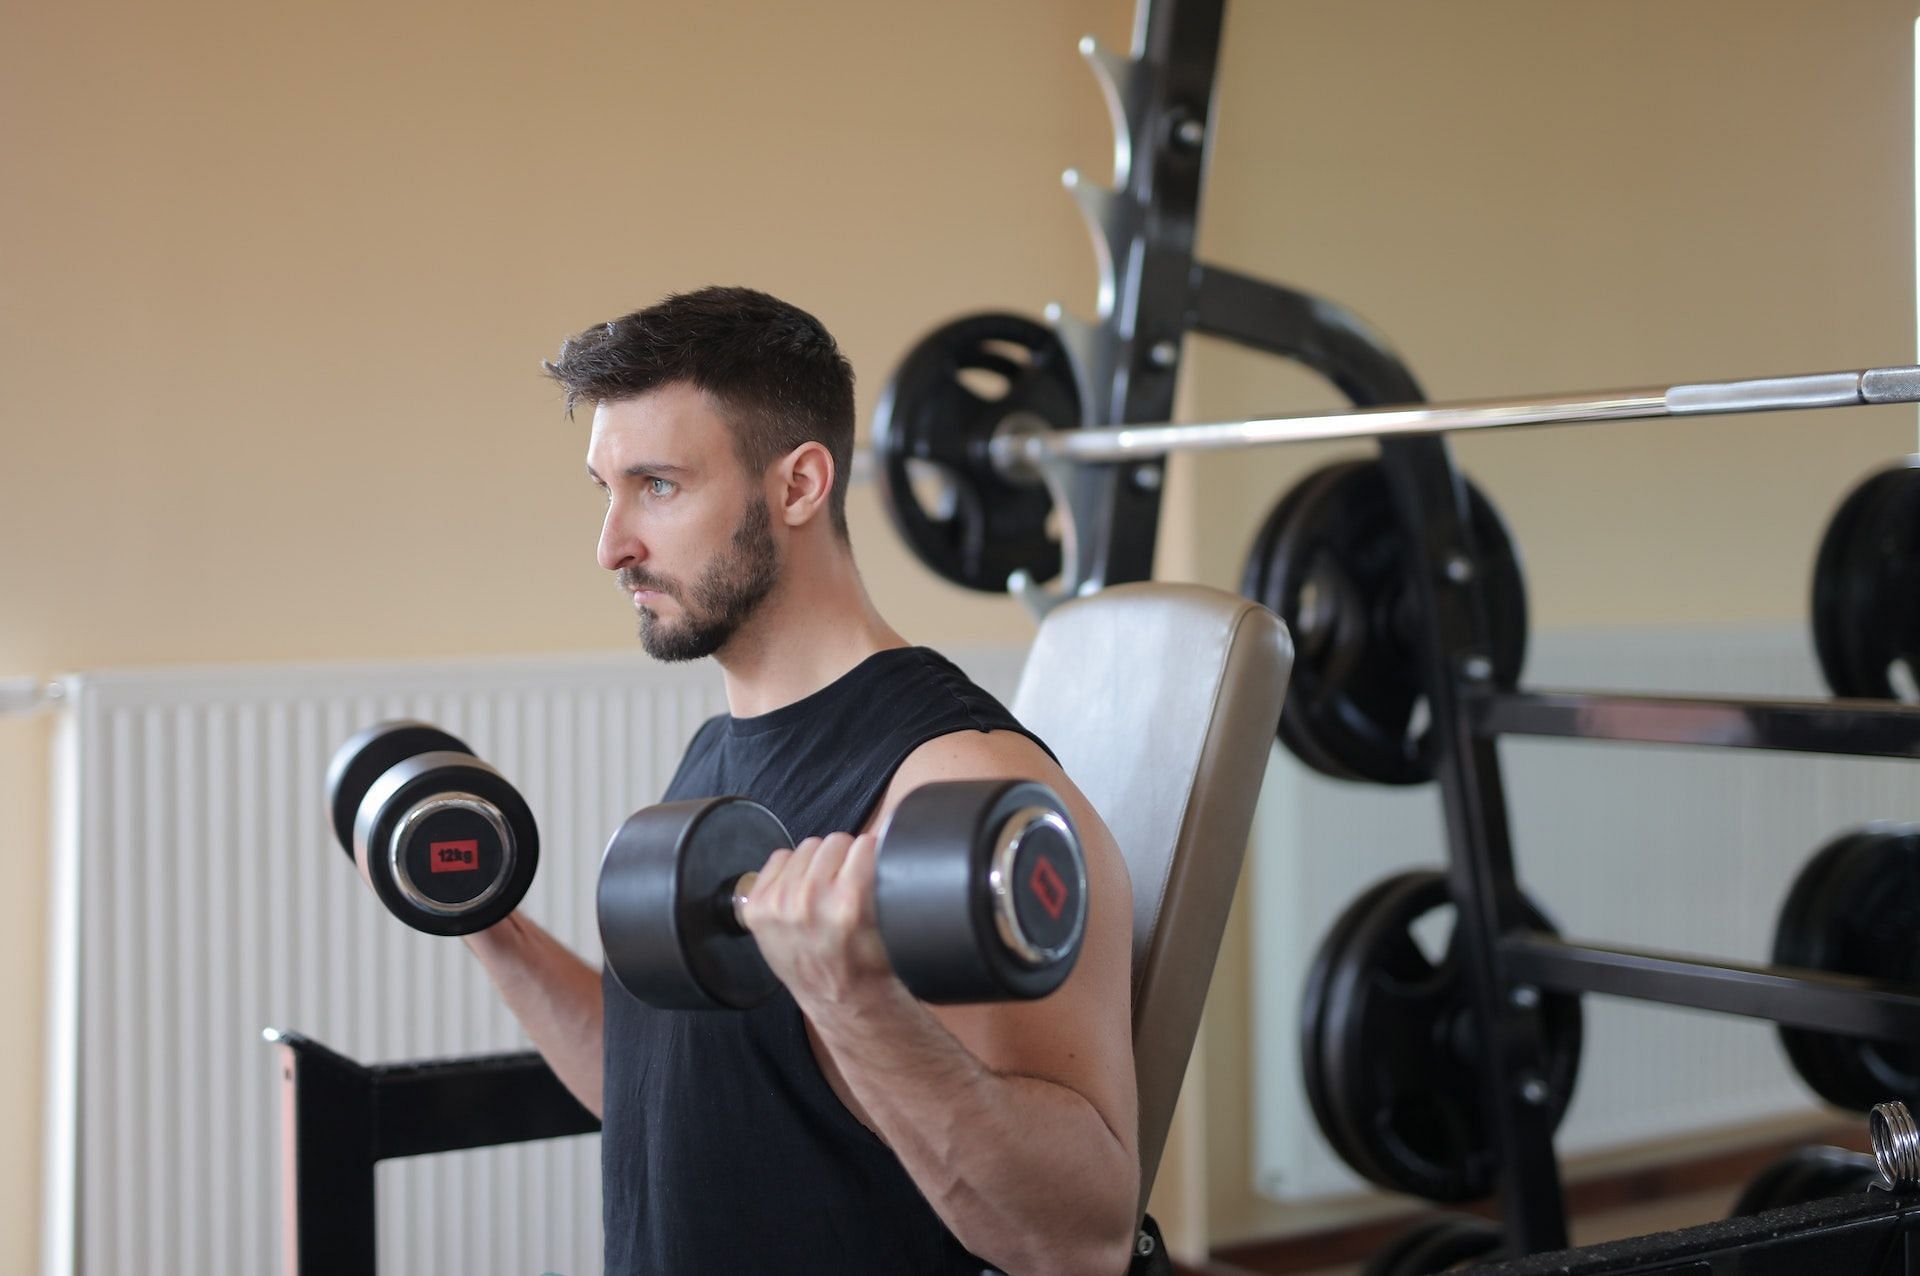 Incline dumbbell curl is a strength training exercise. (Image via Pexels/Andrea Piacquadio)